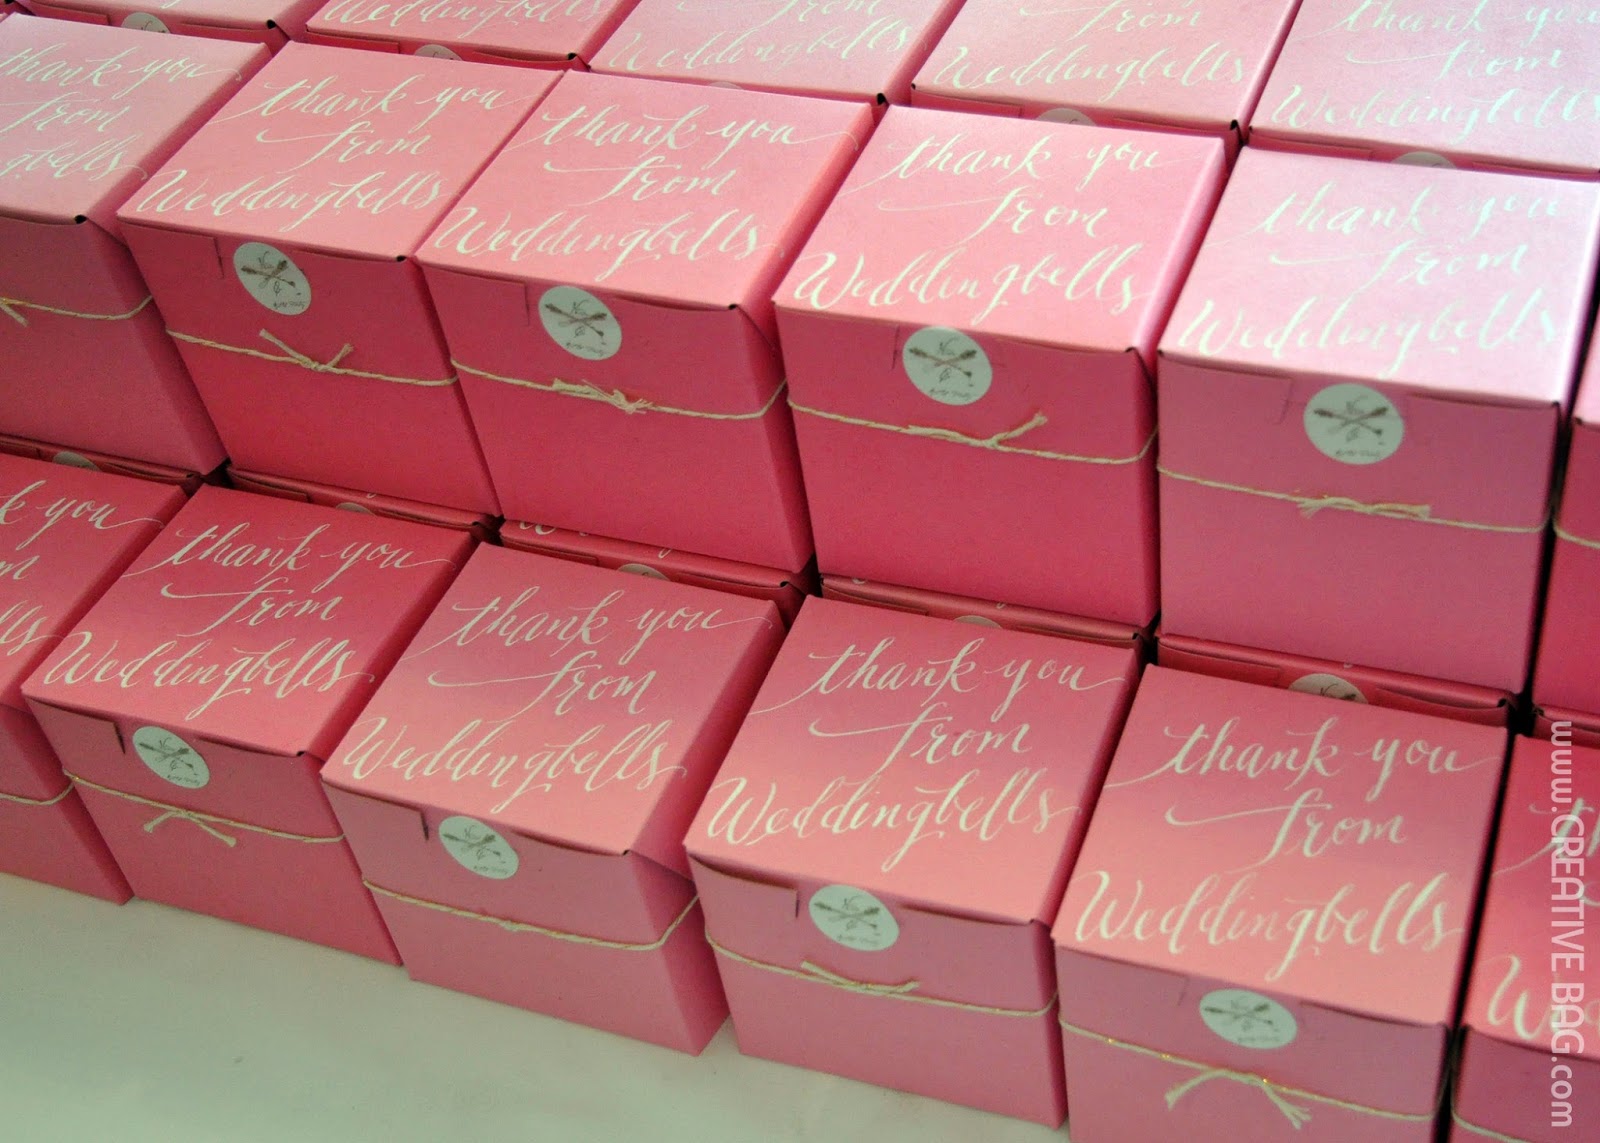 eclair favors - bakery boxes with beautiful calligraphy | creativebag.com